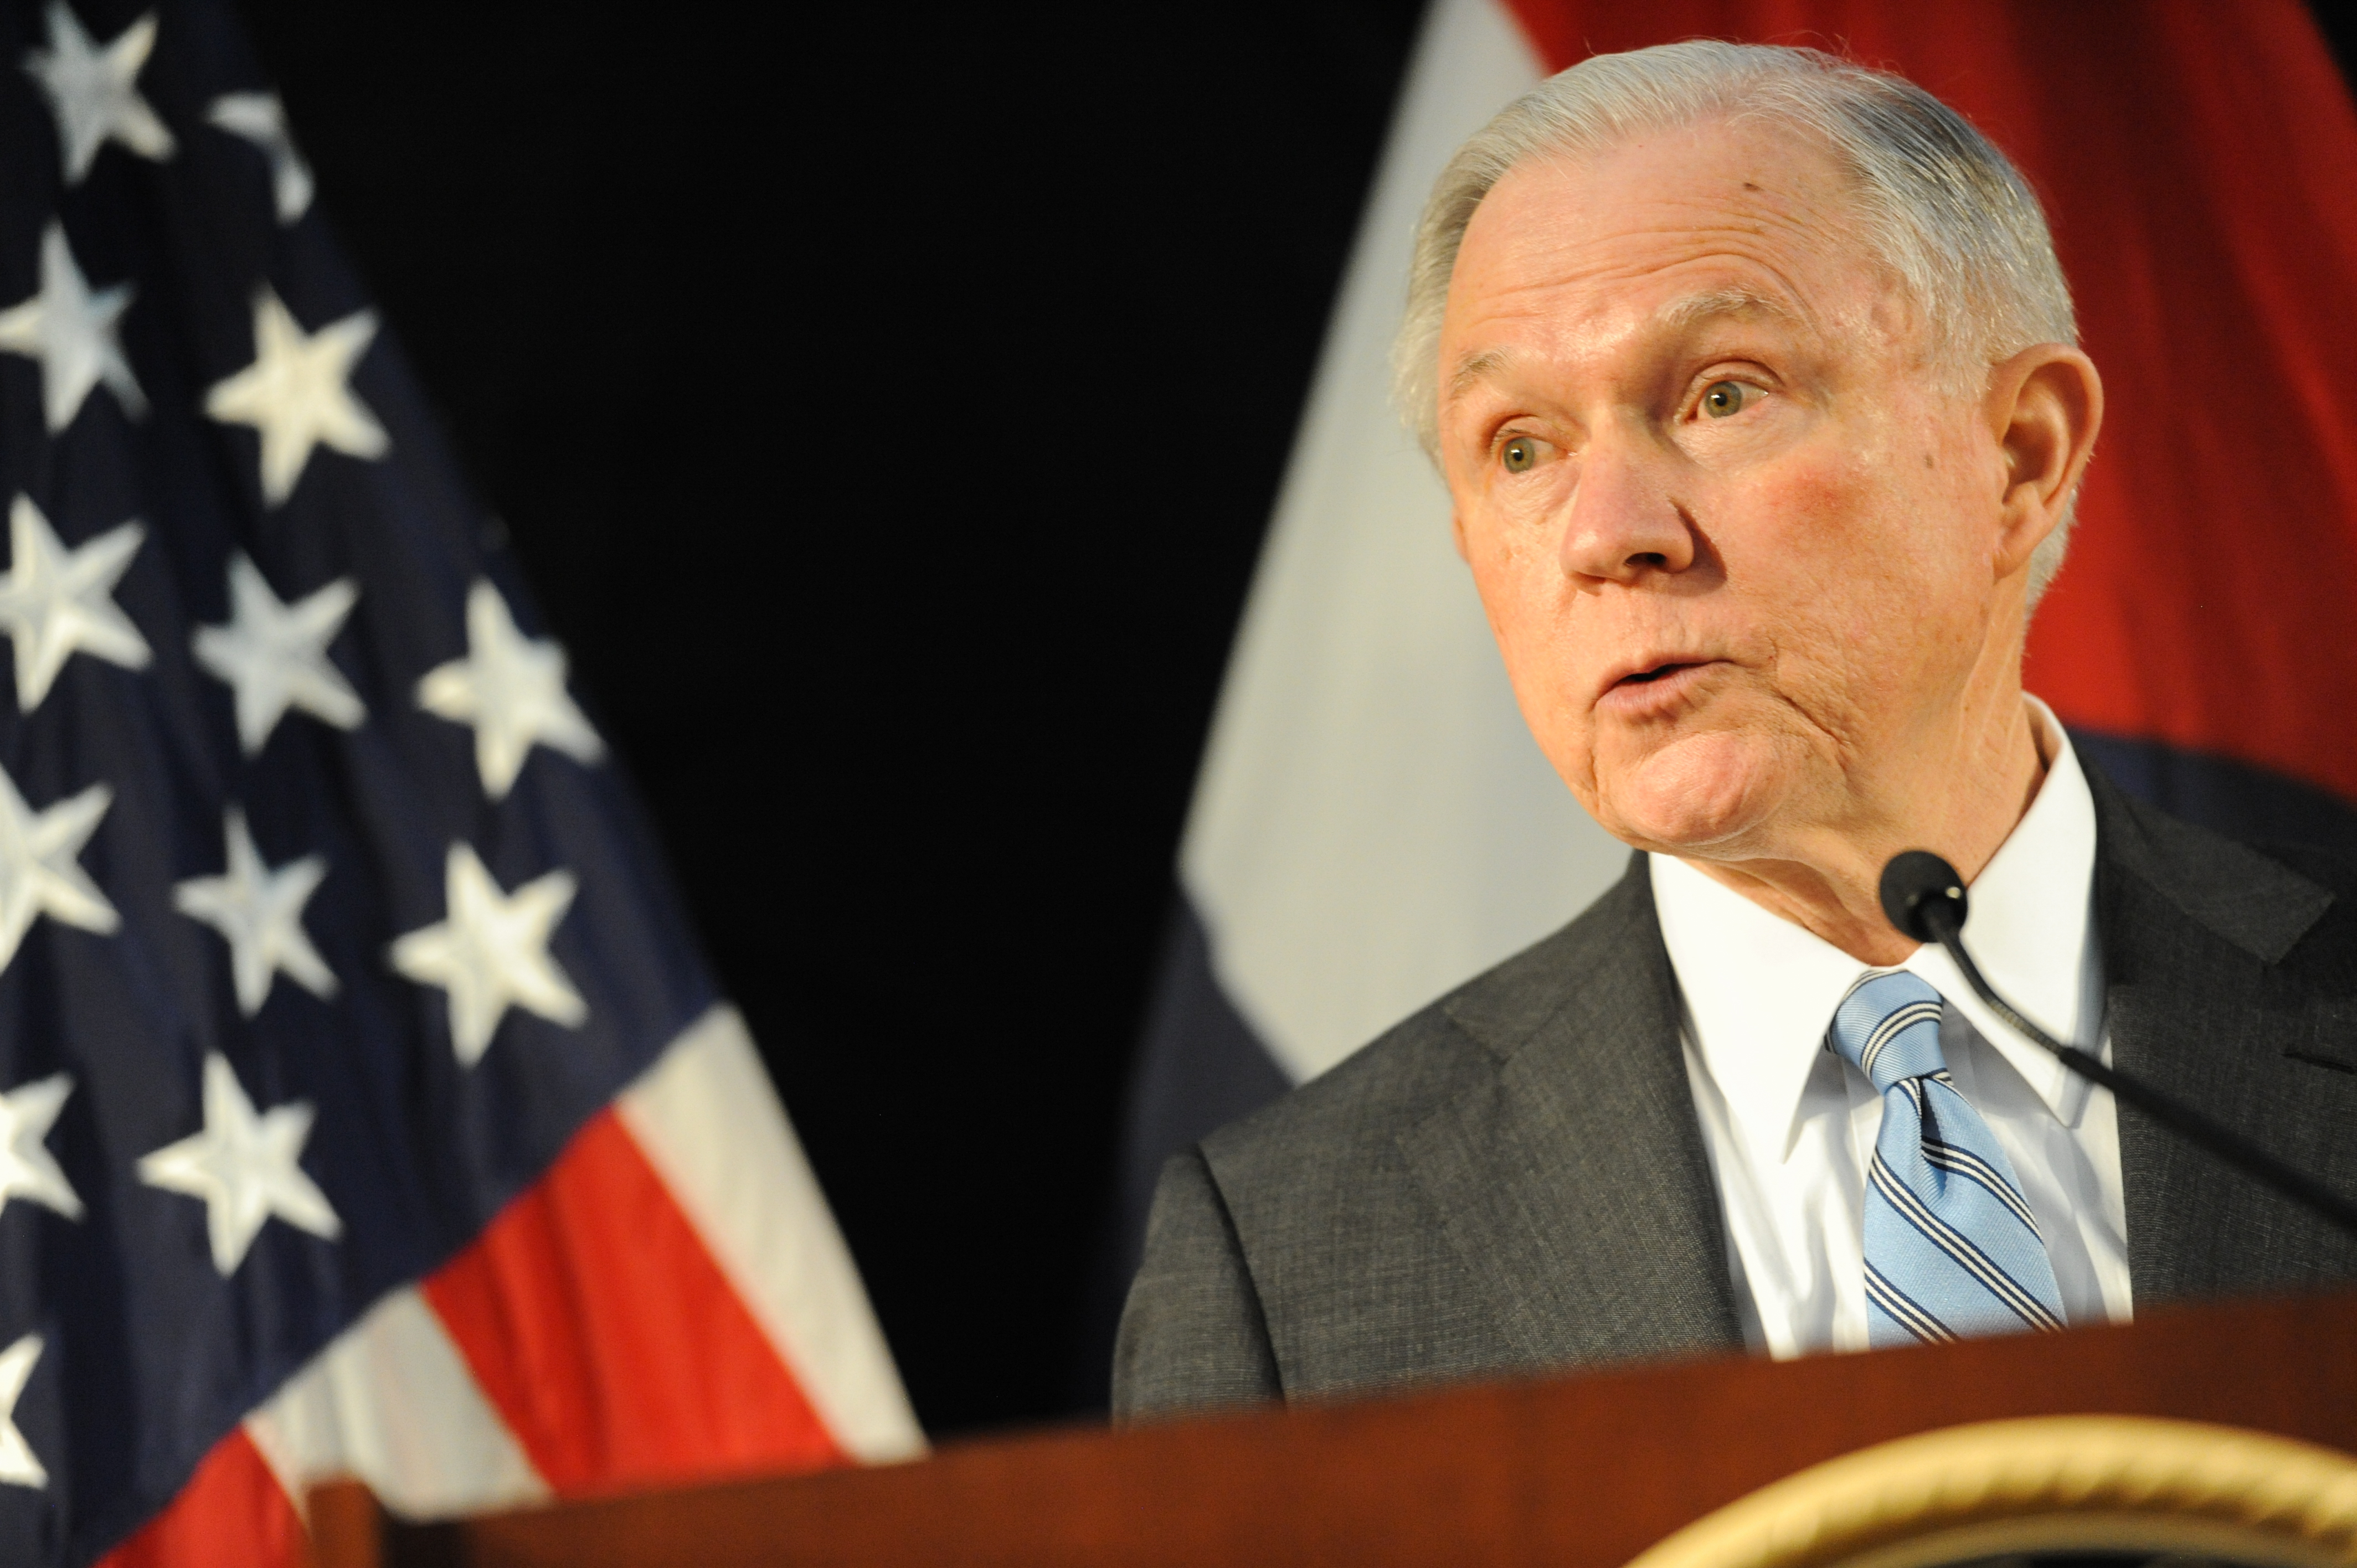 U.S. Attorney General Jeff Sessions addresses law enforcement members on March 31, 2017 in St. Louis, Missouri. (Michael B. Thomas—Getty Images)